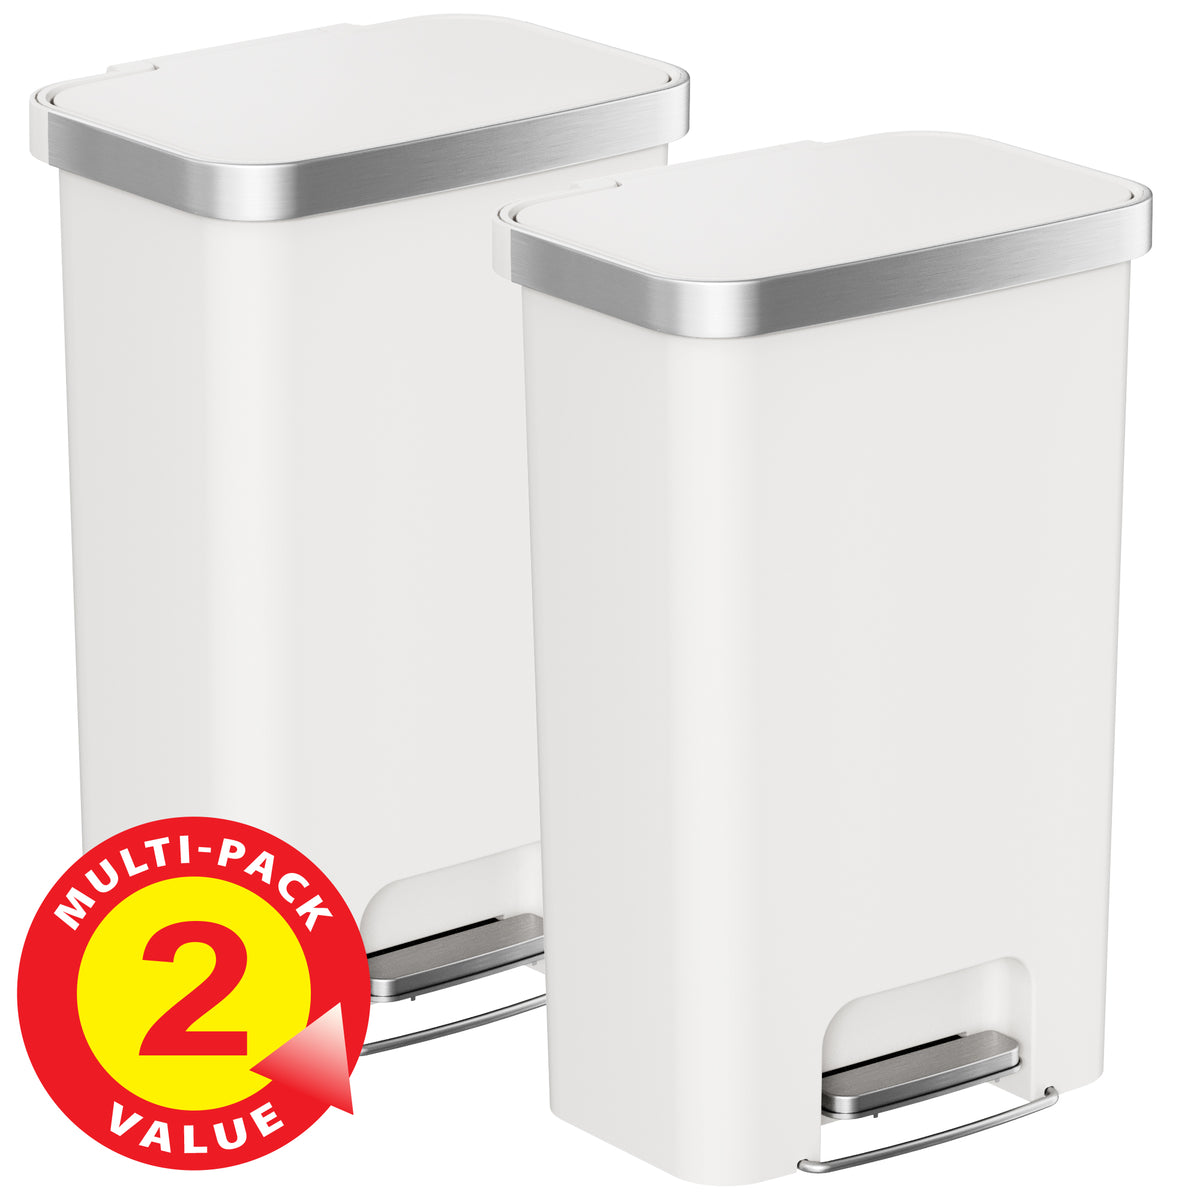 13.2 Gallon / 50 Liter SoftStep Prime Step Pedal Trash Can (White) - 2-PACK